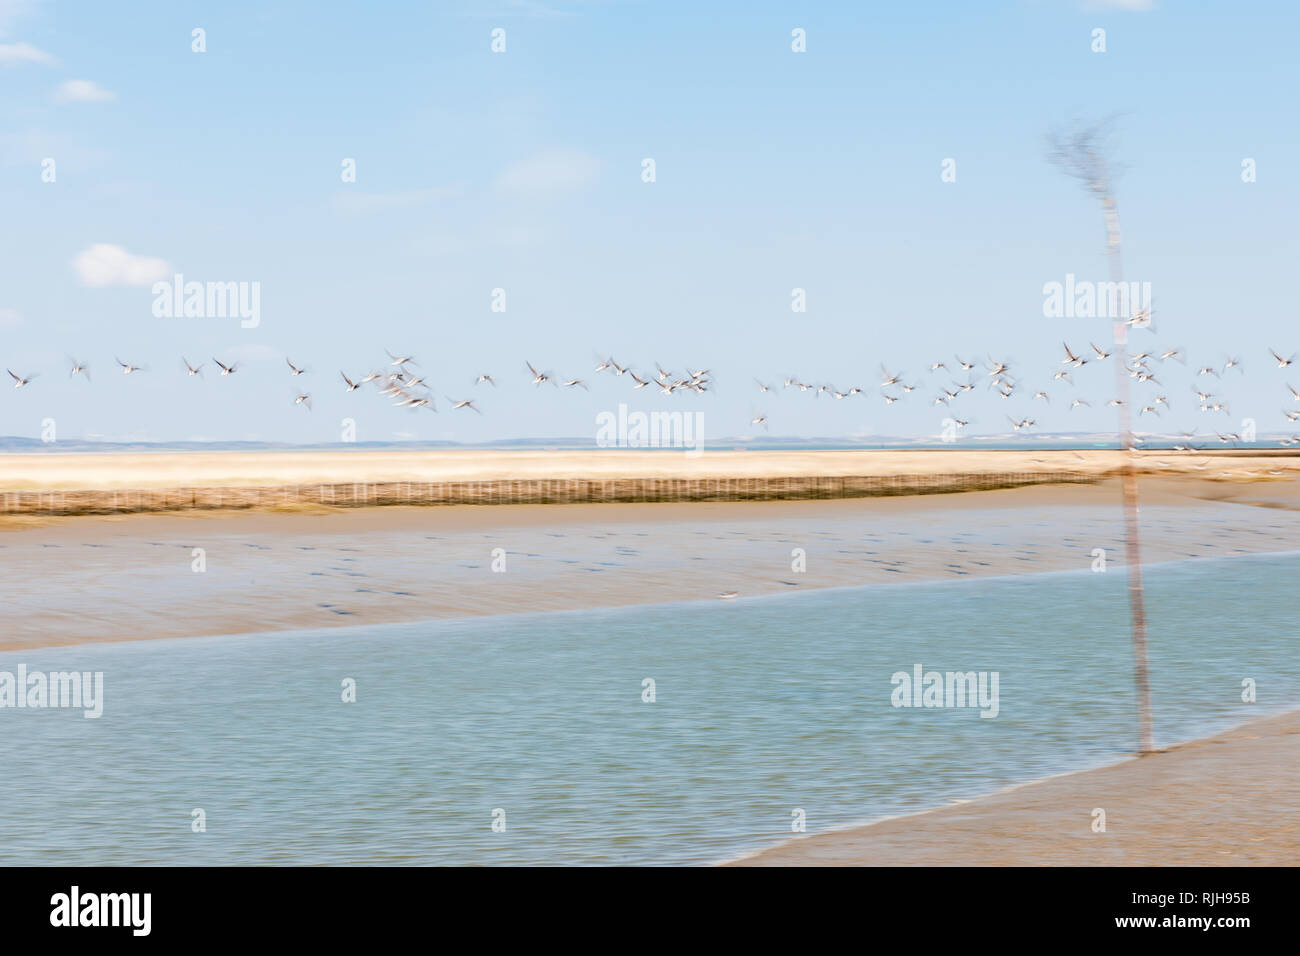 Sea gulls flying at the habor of Nordstrand in the winter season, Nordfriesland, Schleswig-Holstein, Germany, Europe Stock Photo